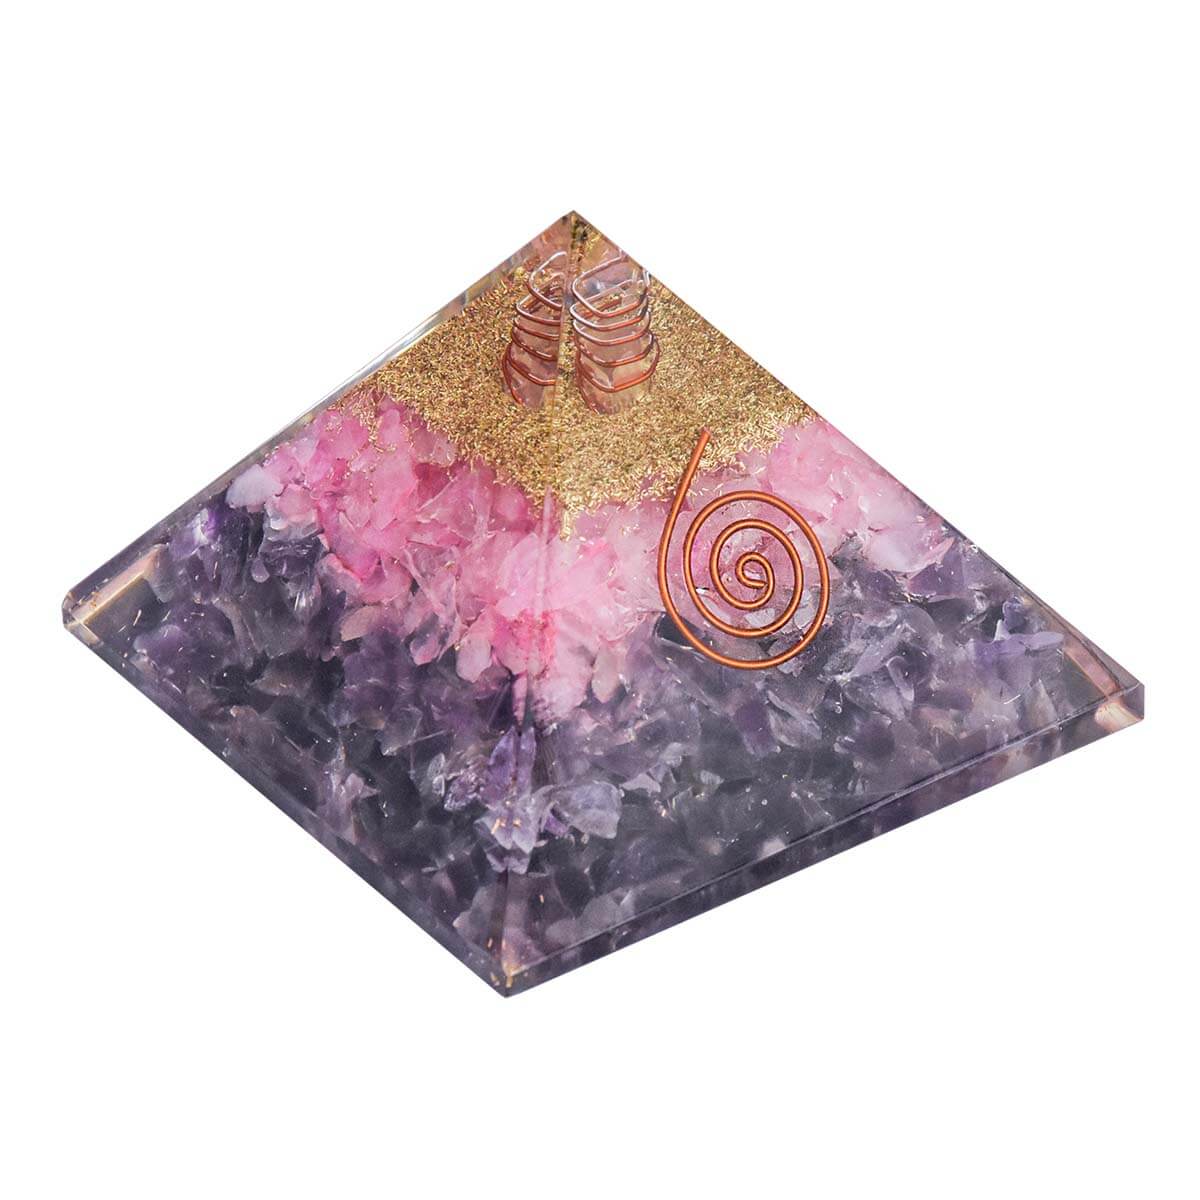 Pre- Energized Natural Rose Quartz & Amythest Crystal Pyramid for The Love, Stability, Showpiece, Car Dashboard, Home & Office Gifting